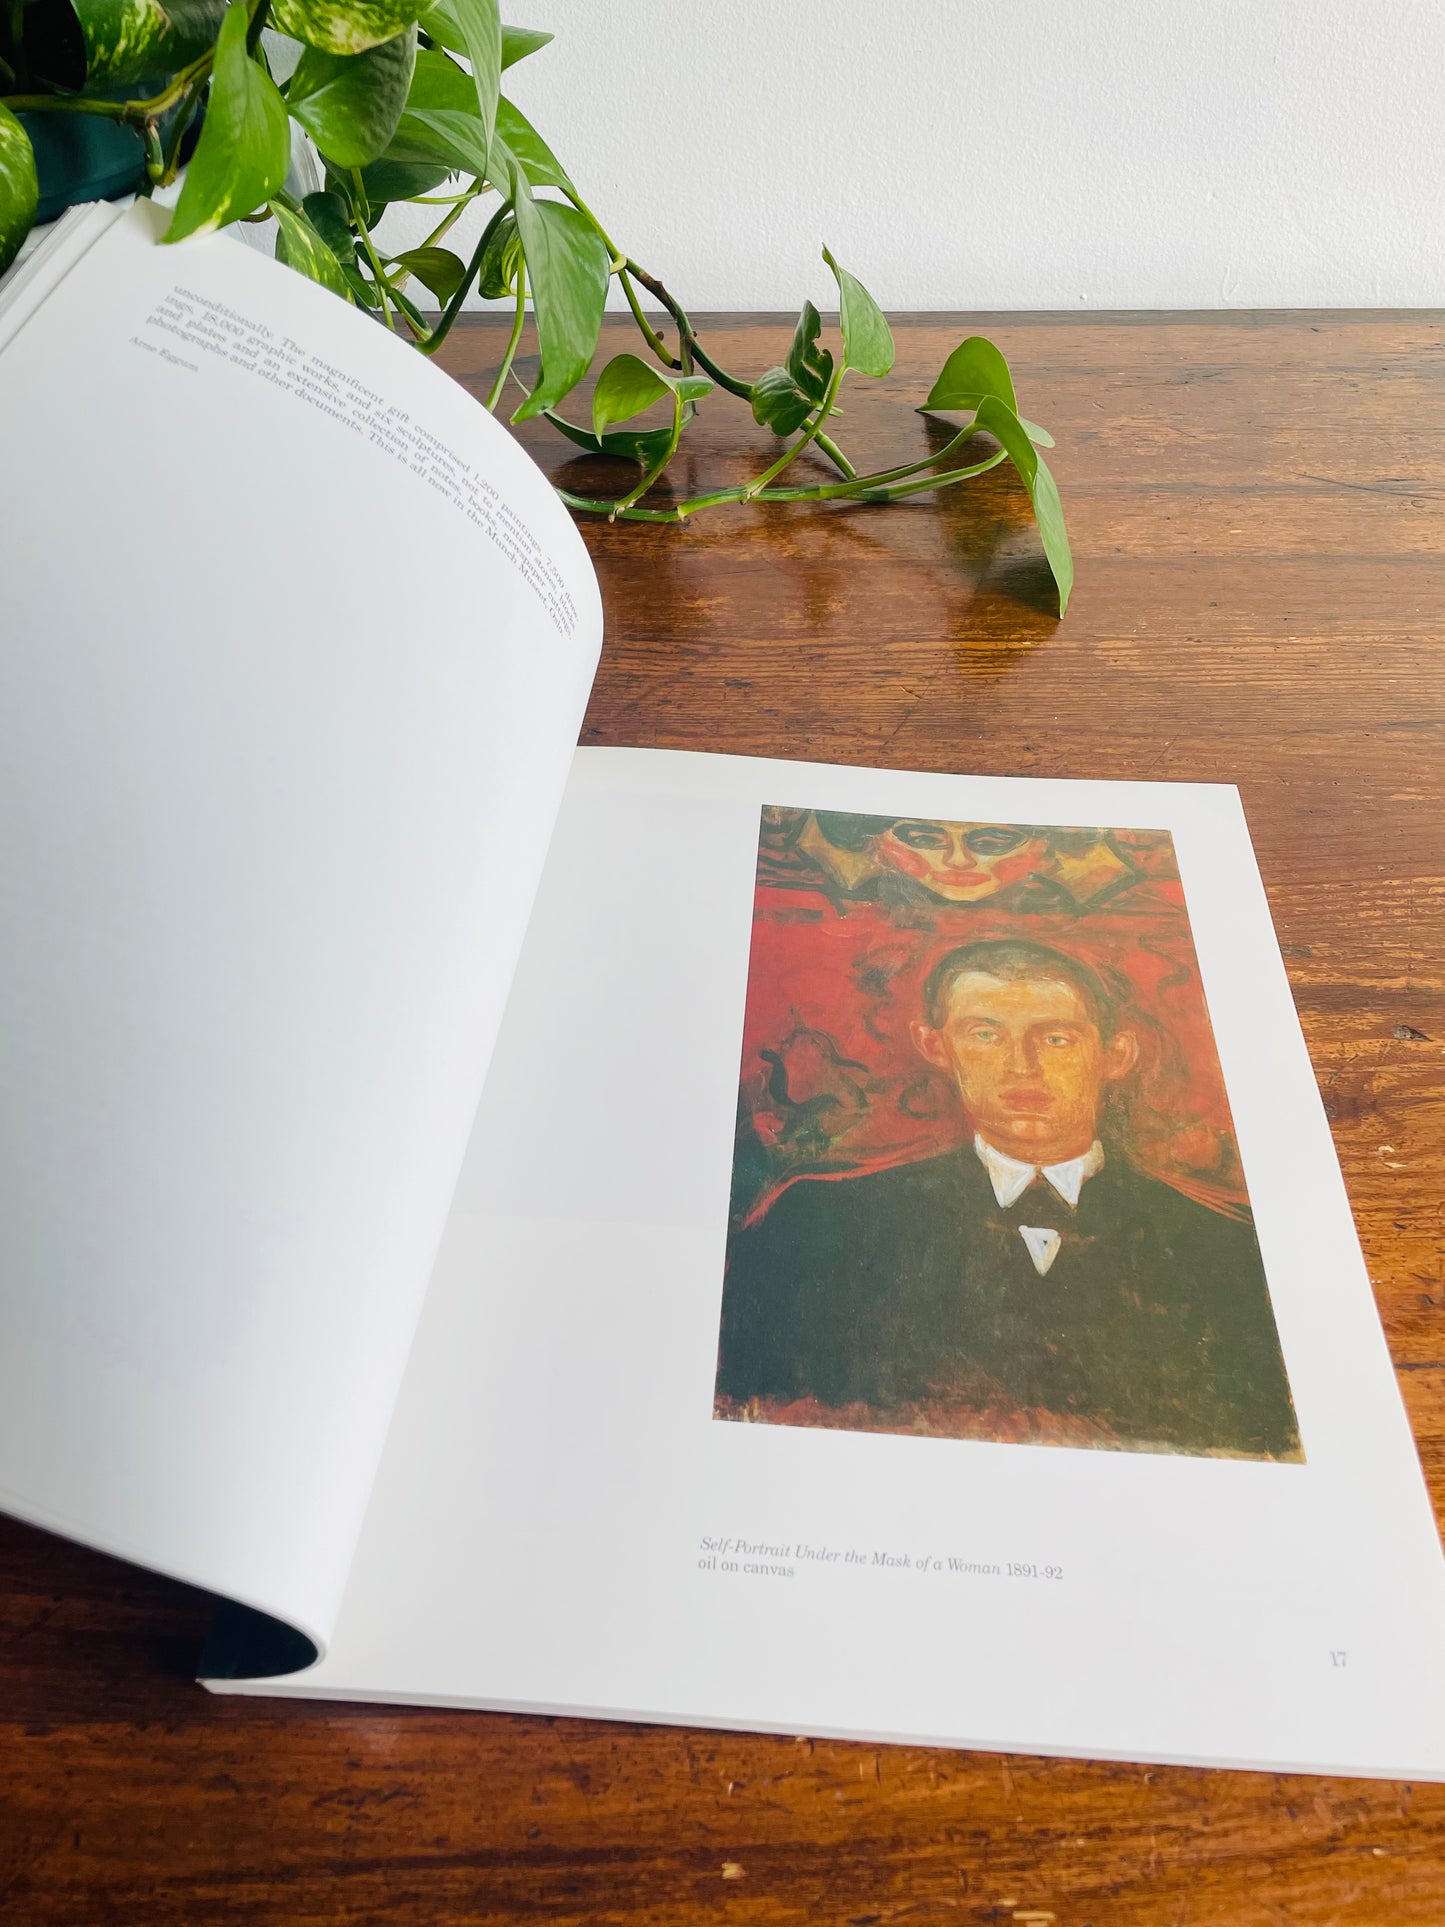 Edvard Munch Art Exhibition Book - Vancouver Art Gallery May 31 to August 4 (1986)